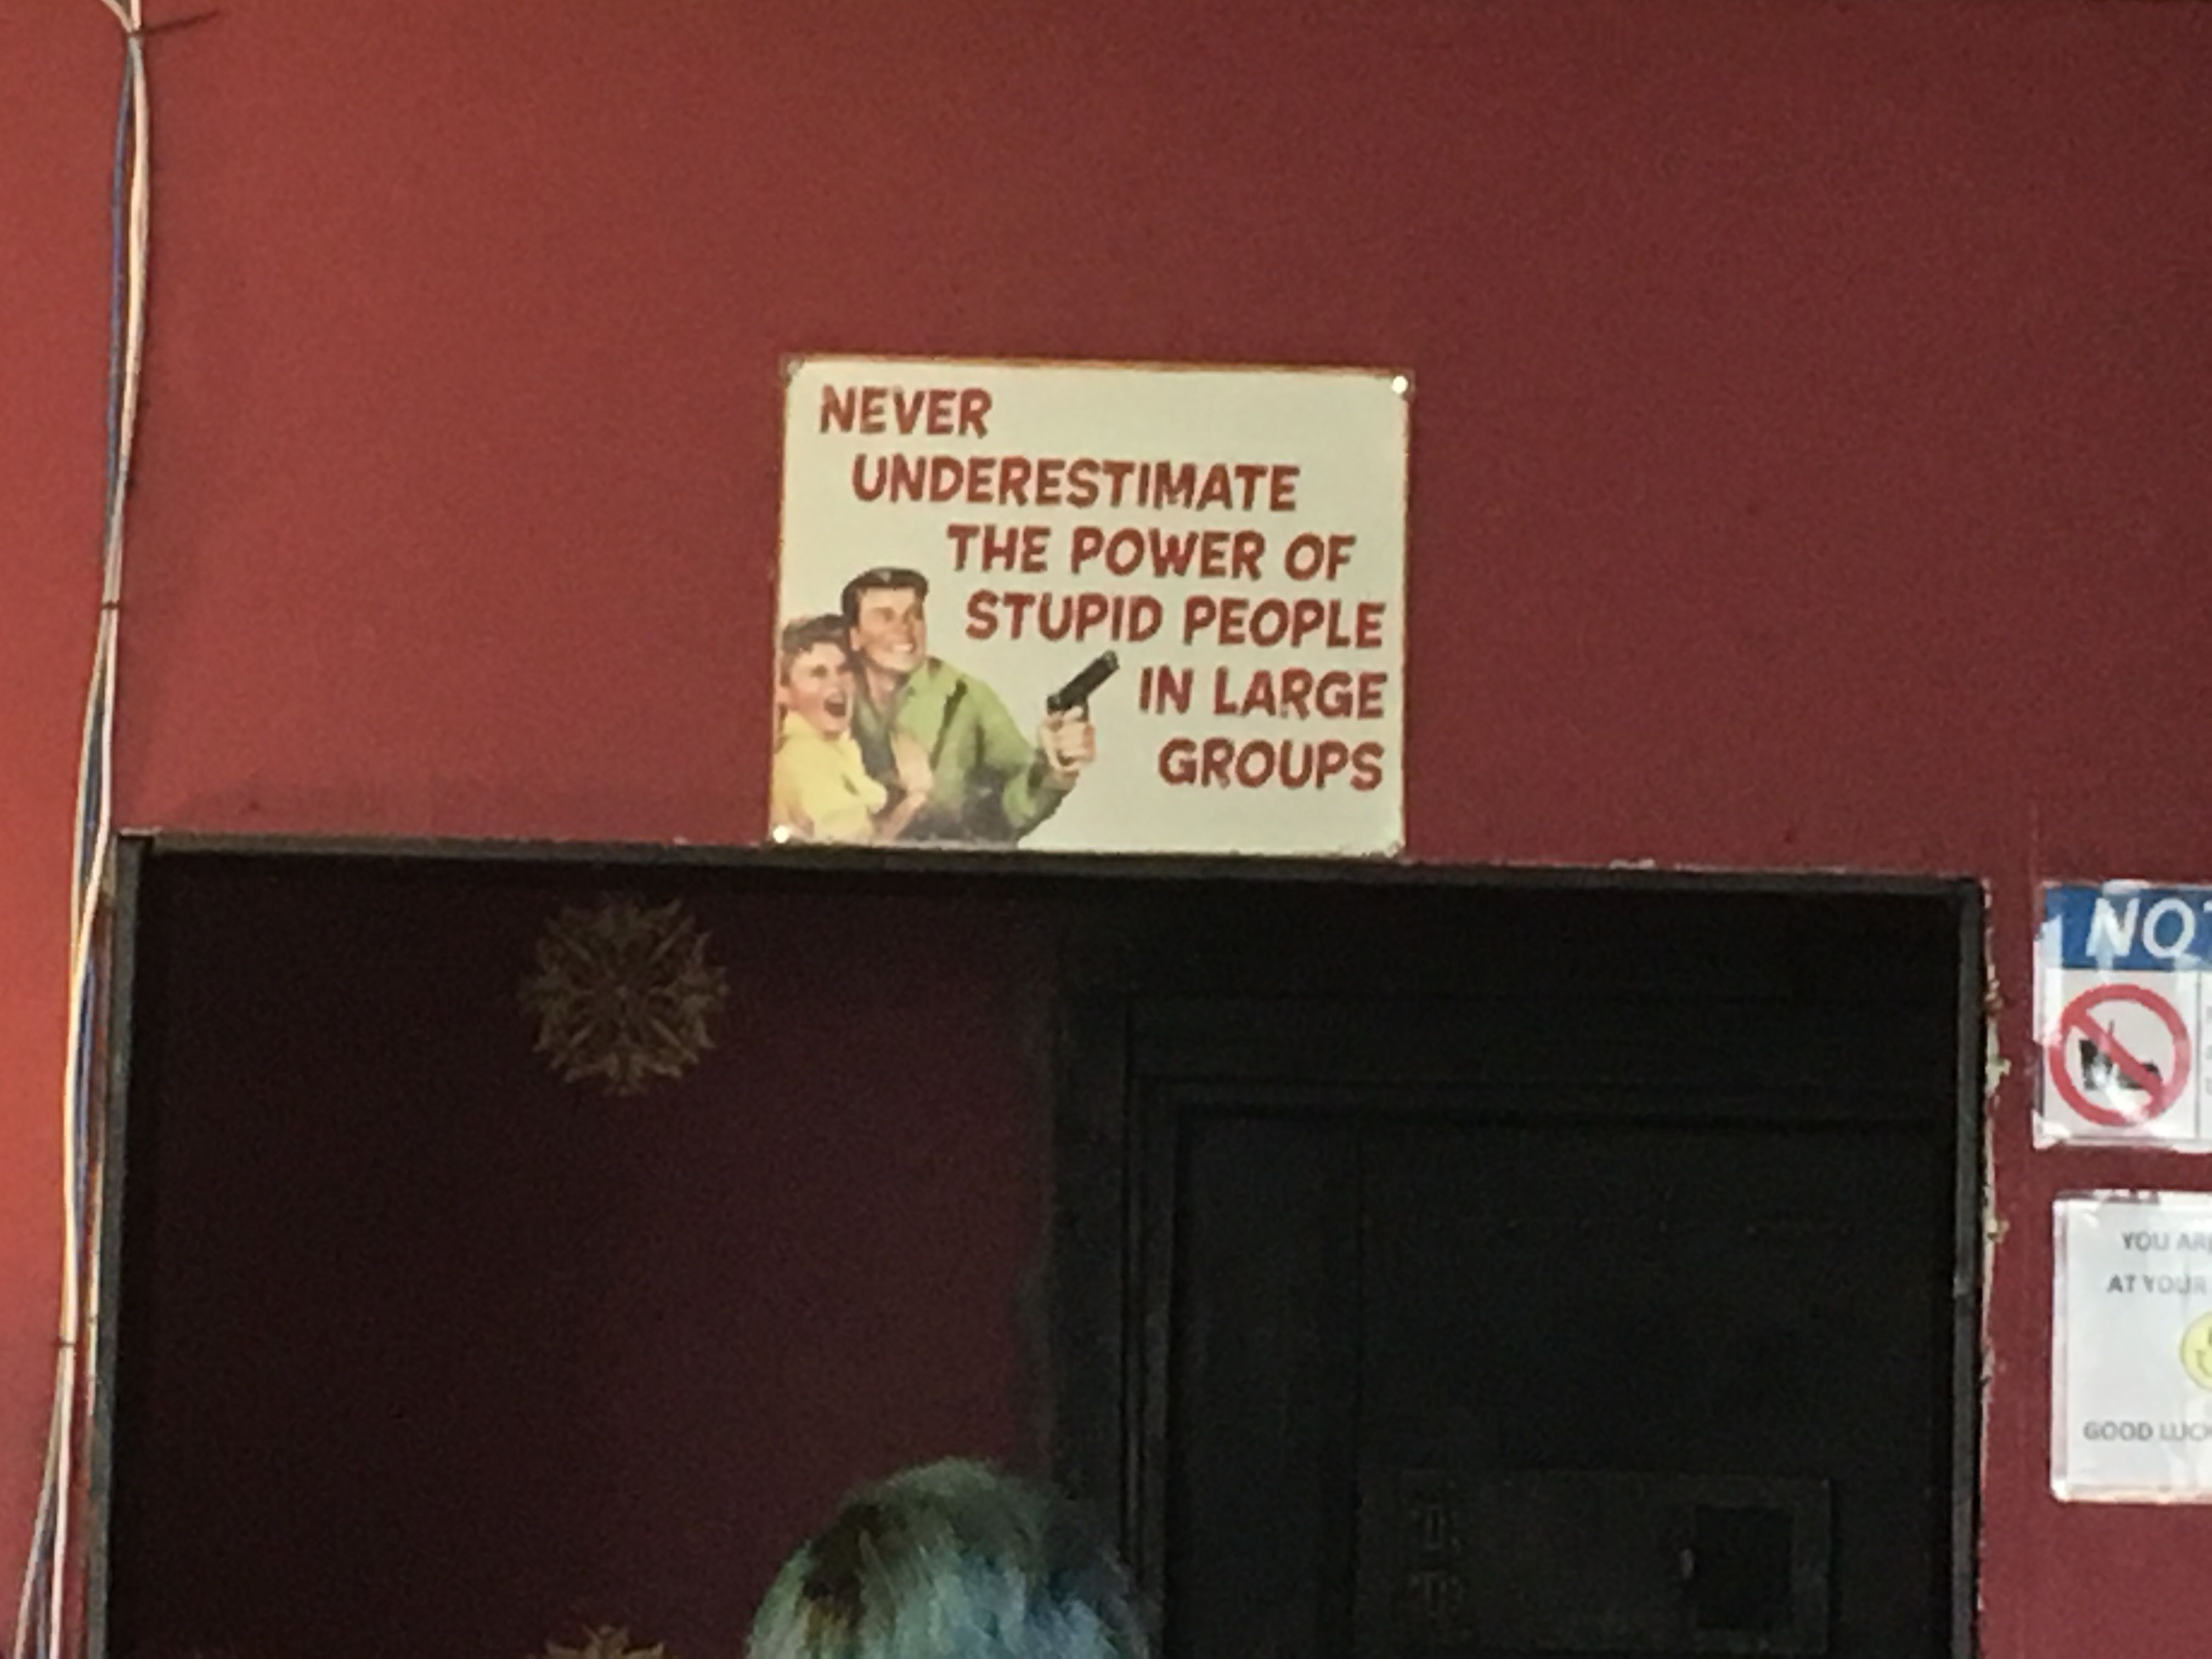 The sign above this escape room